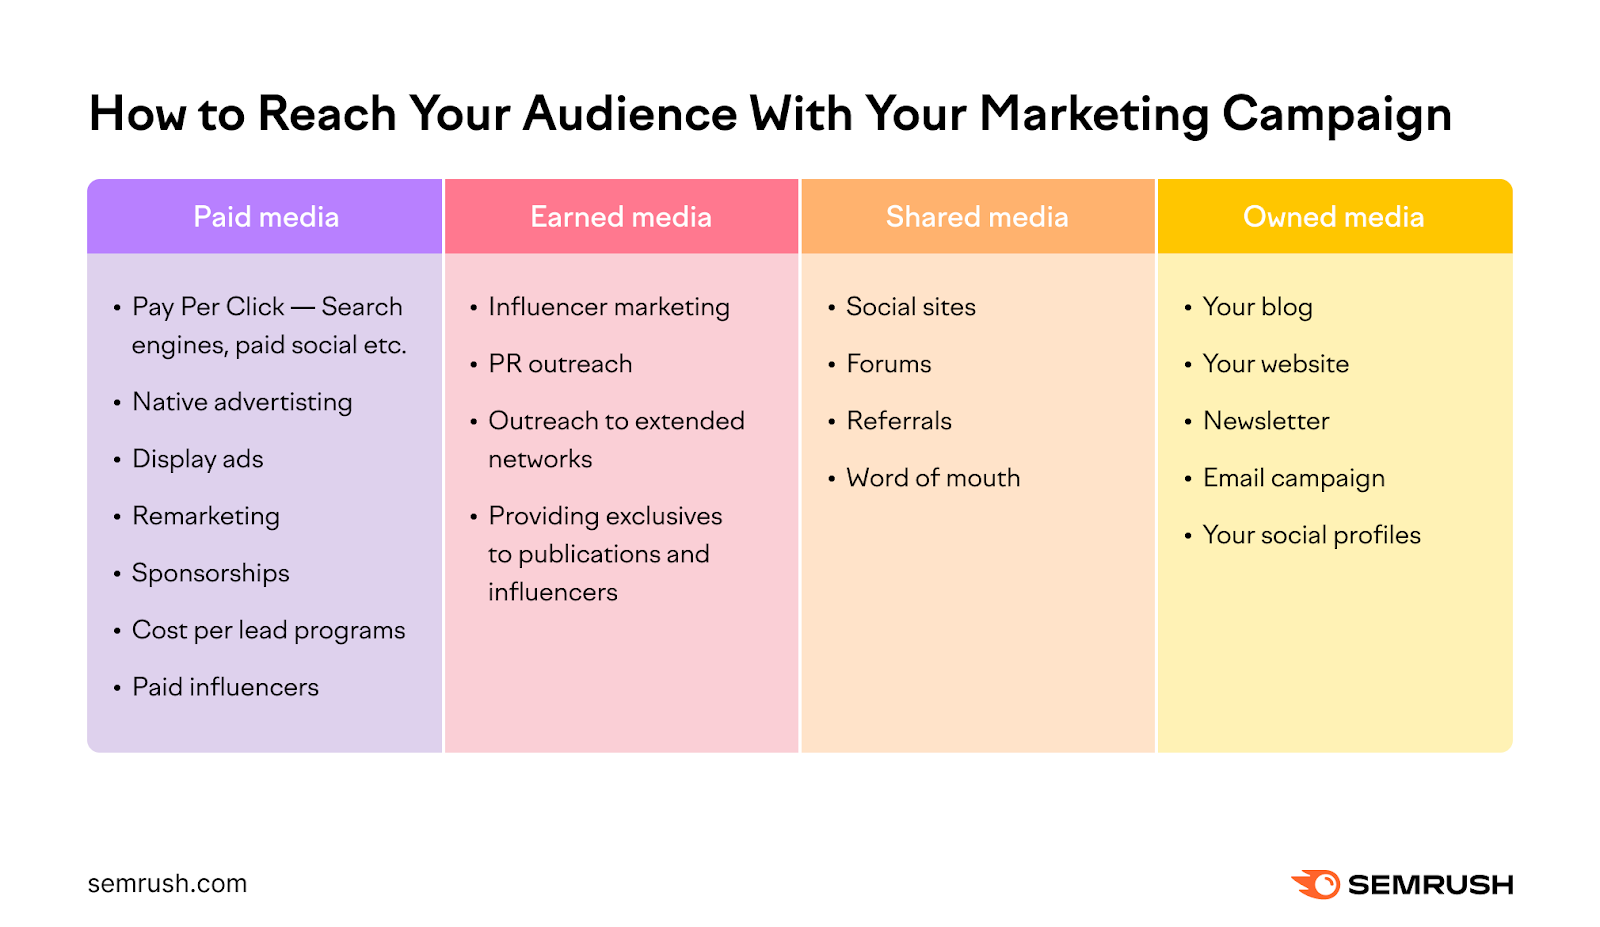 A summary of how to reach your audience with your marketing campaign, with paid, earned, shared, and owned media